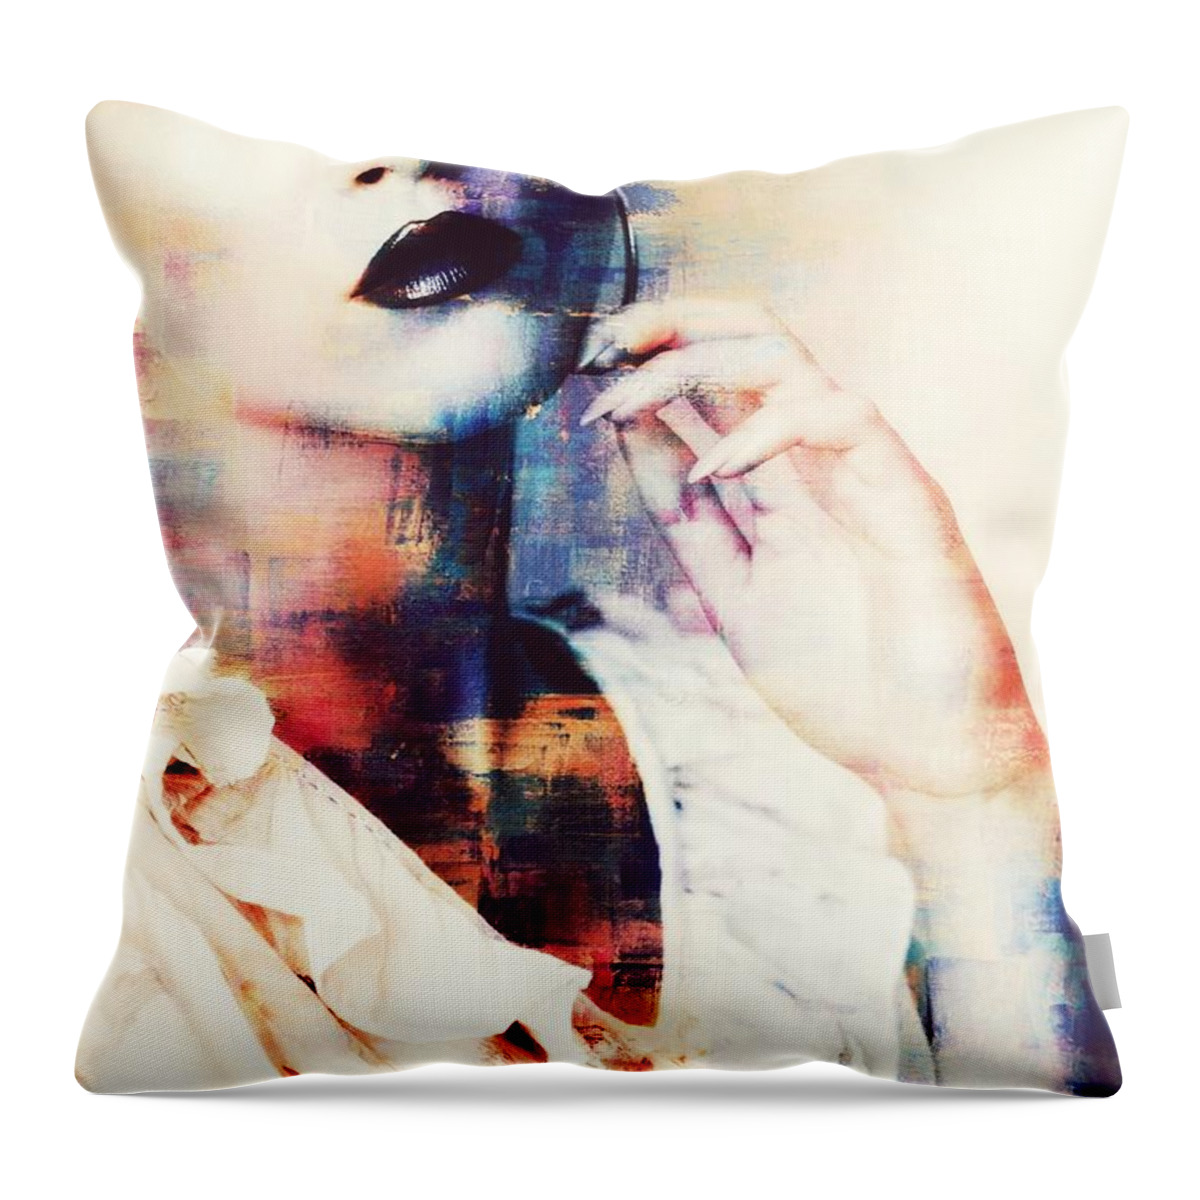 Women Throw Pillow featuring the digital art Can You Imagine by Paul Lovering